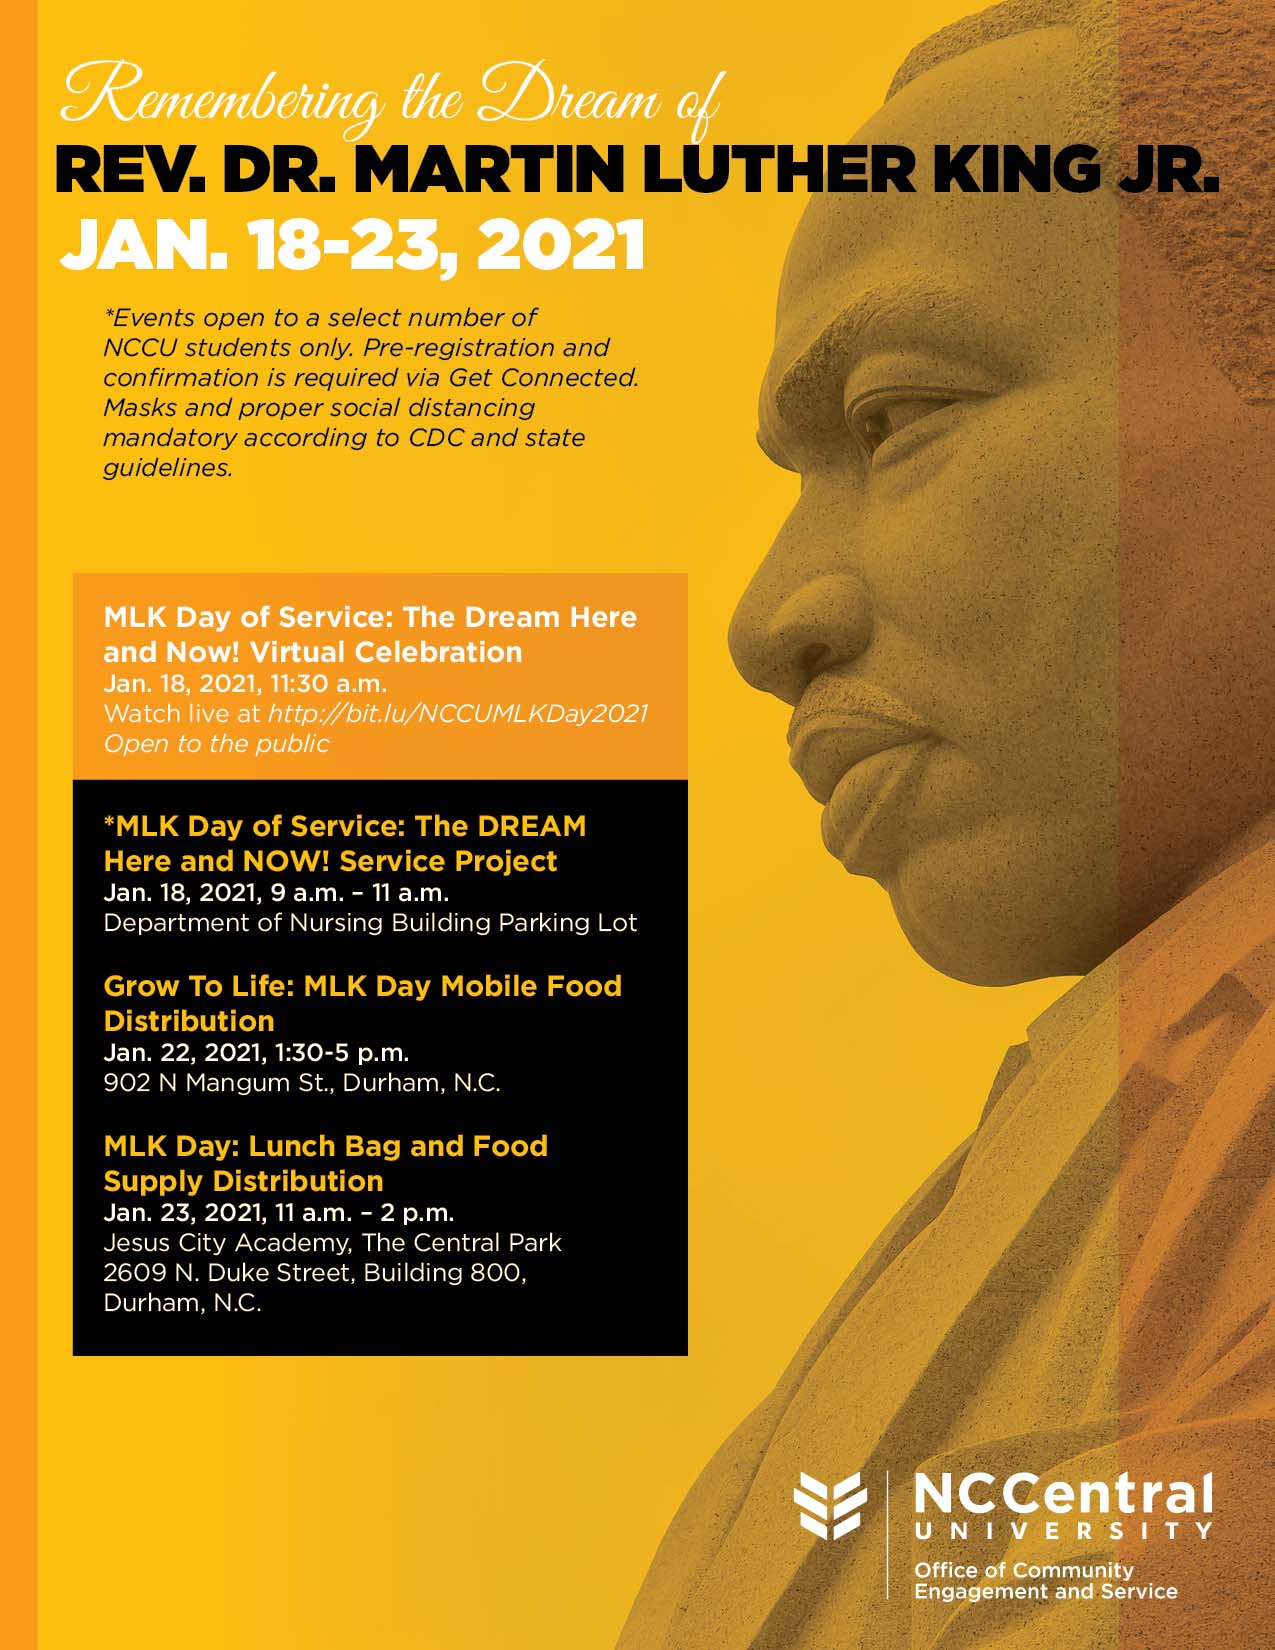 MLK Day Events